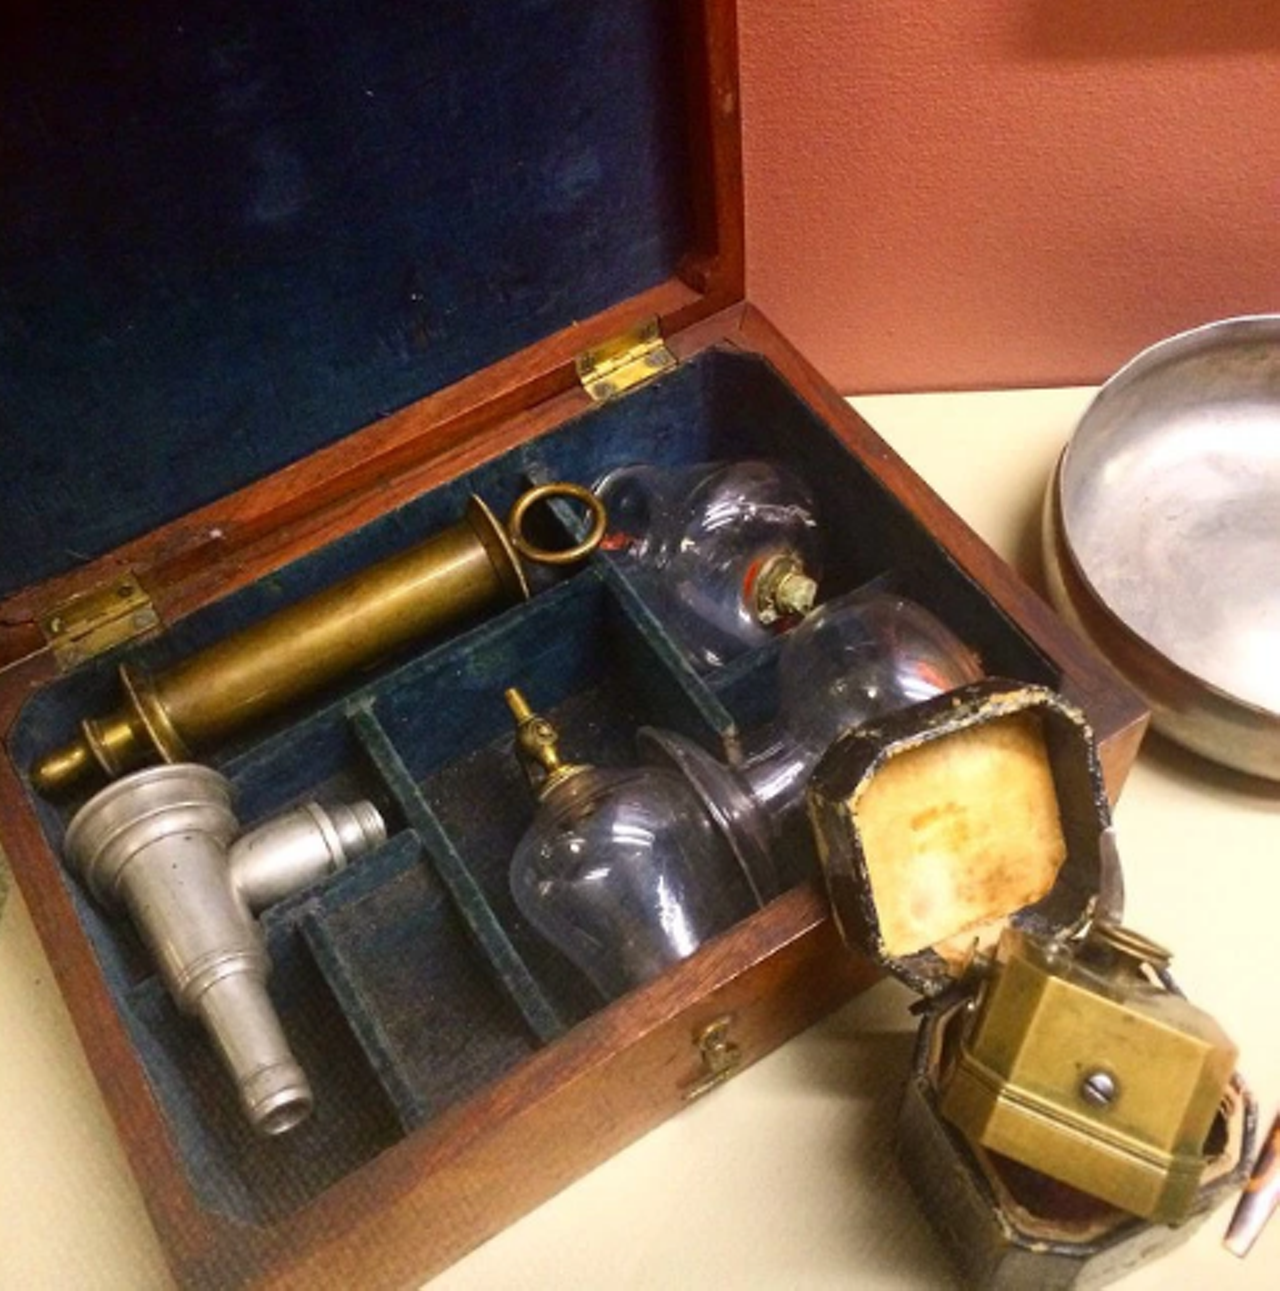 Cupping set and scarificator (c. 1860) to relieve humoral imbalances and improve health.